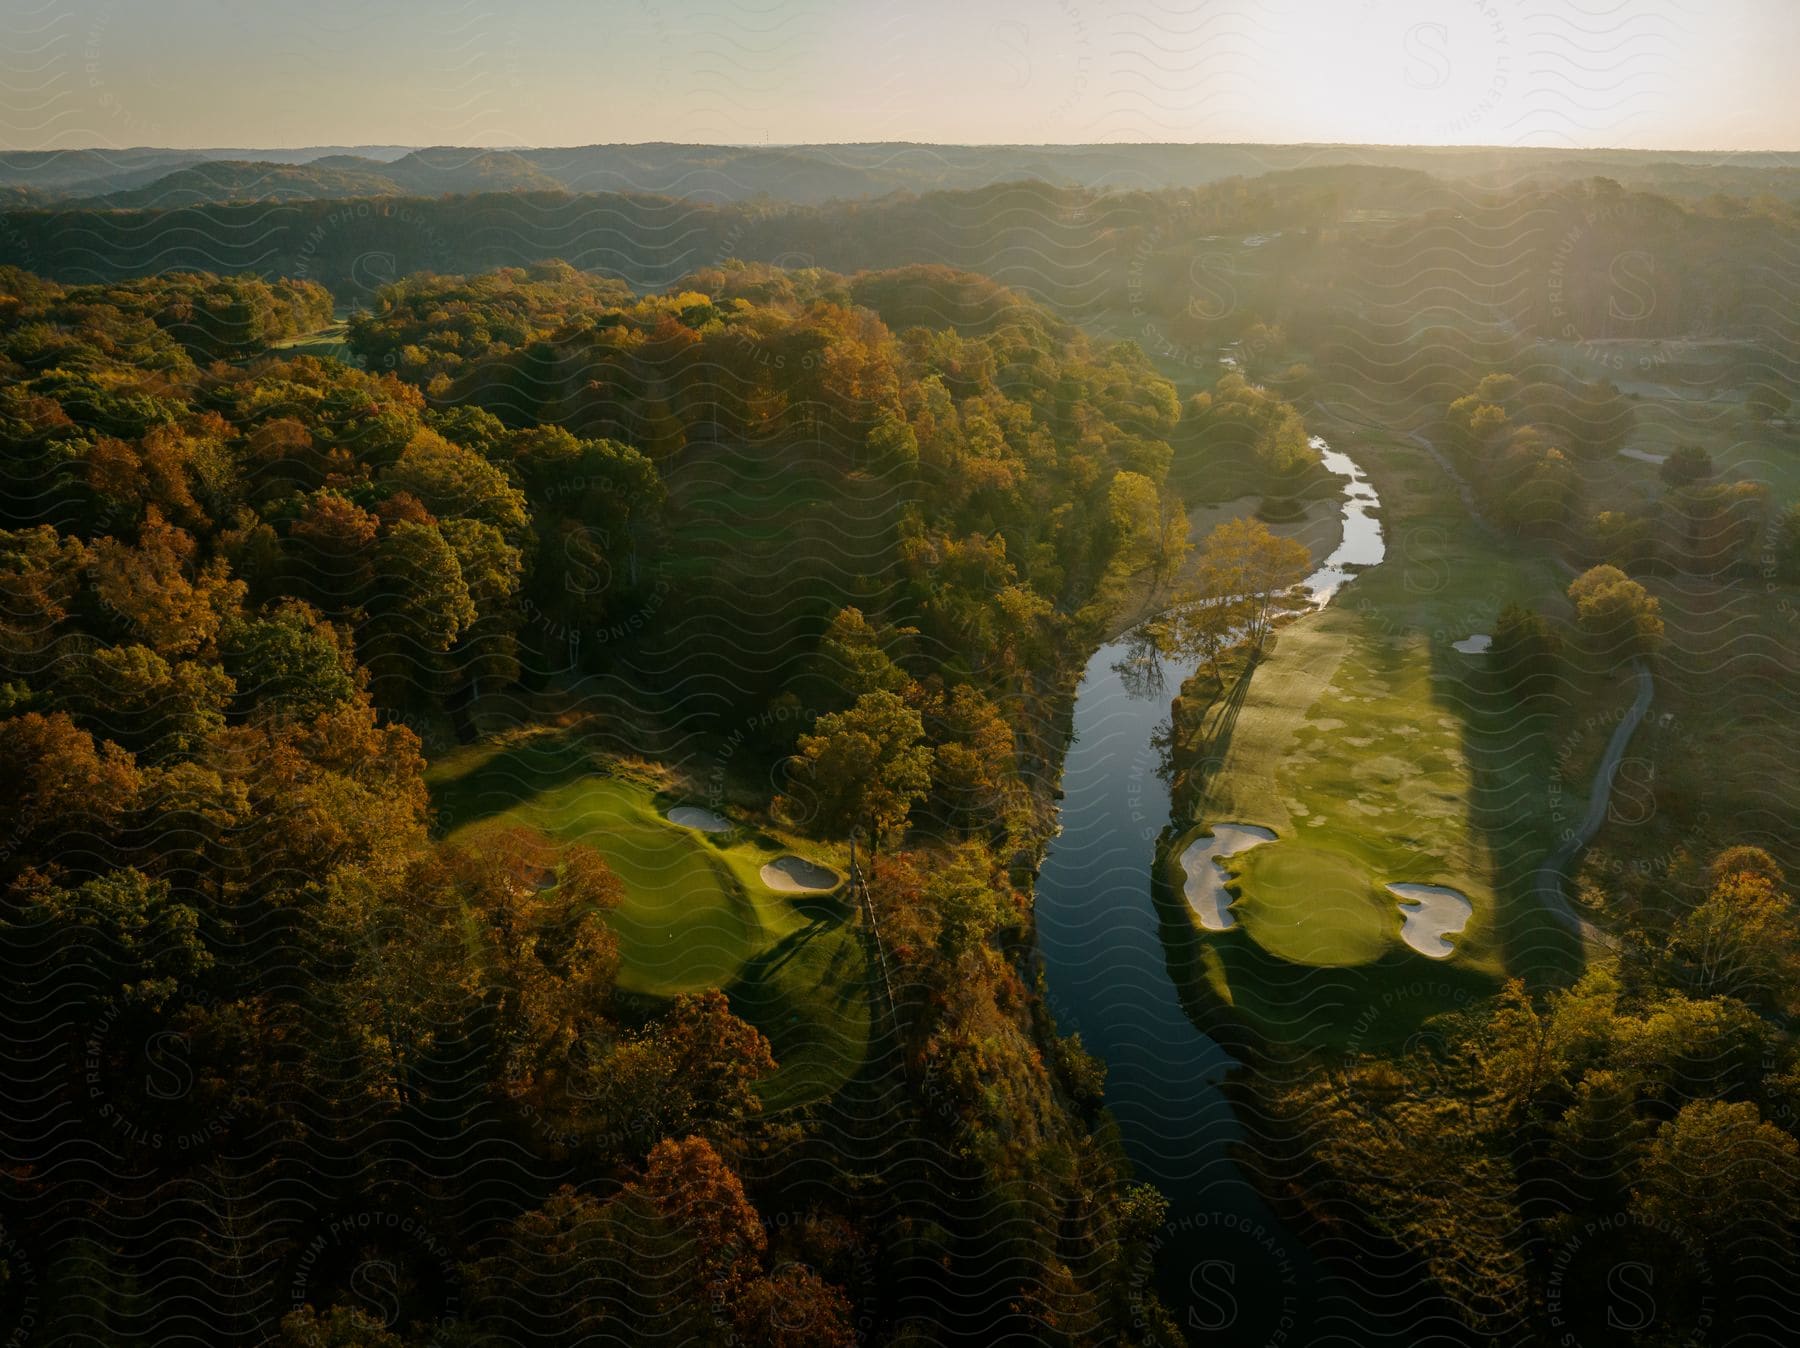 Stock photo of a river runs between golf courses surrounded by a forest of trees in fall colors